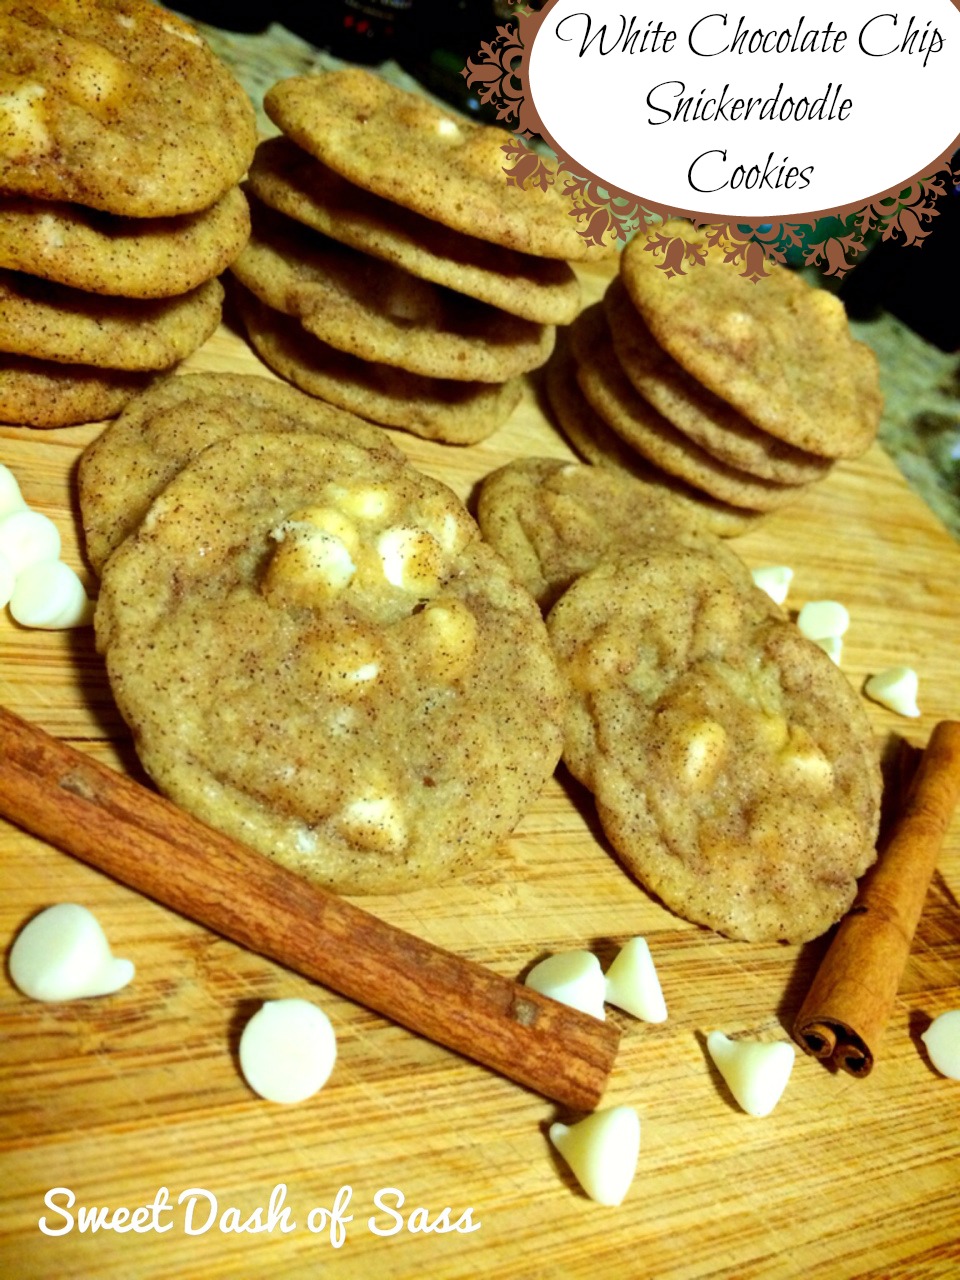 White Chocolate Chip Snickerdoodle Cookies #25DaysCookieStyle www.SweetDashofSass.com